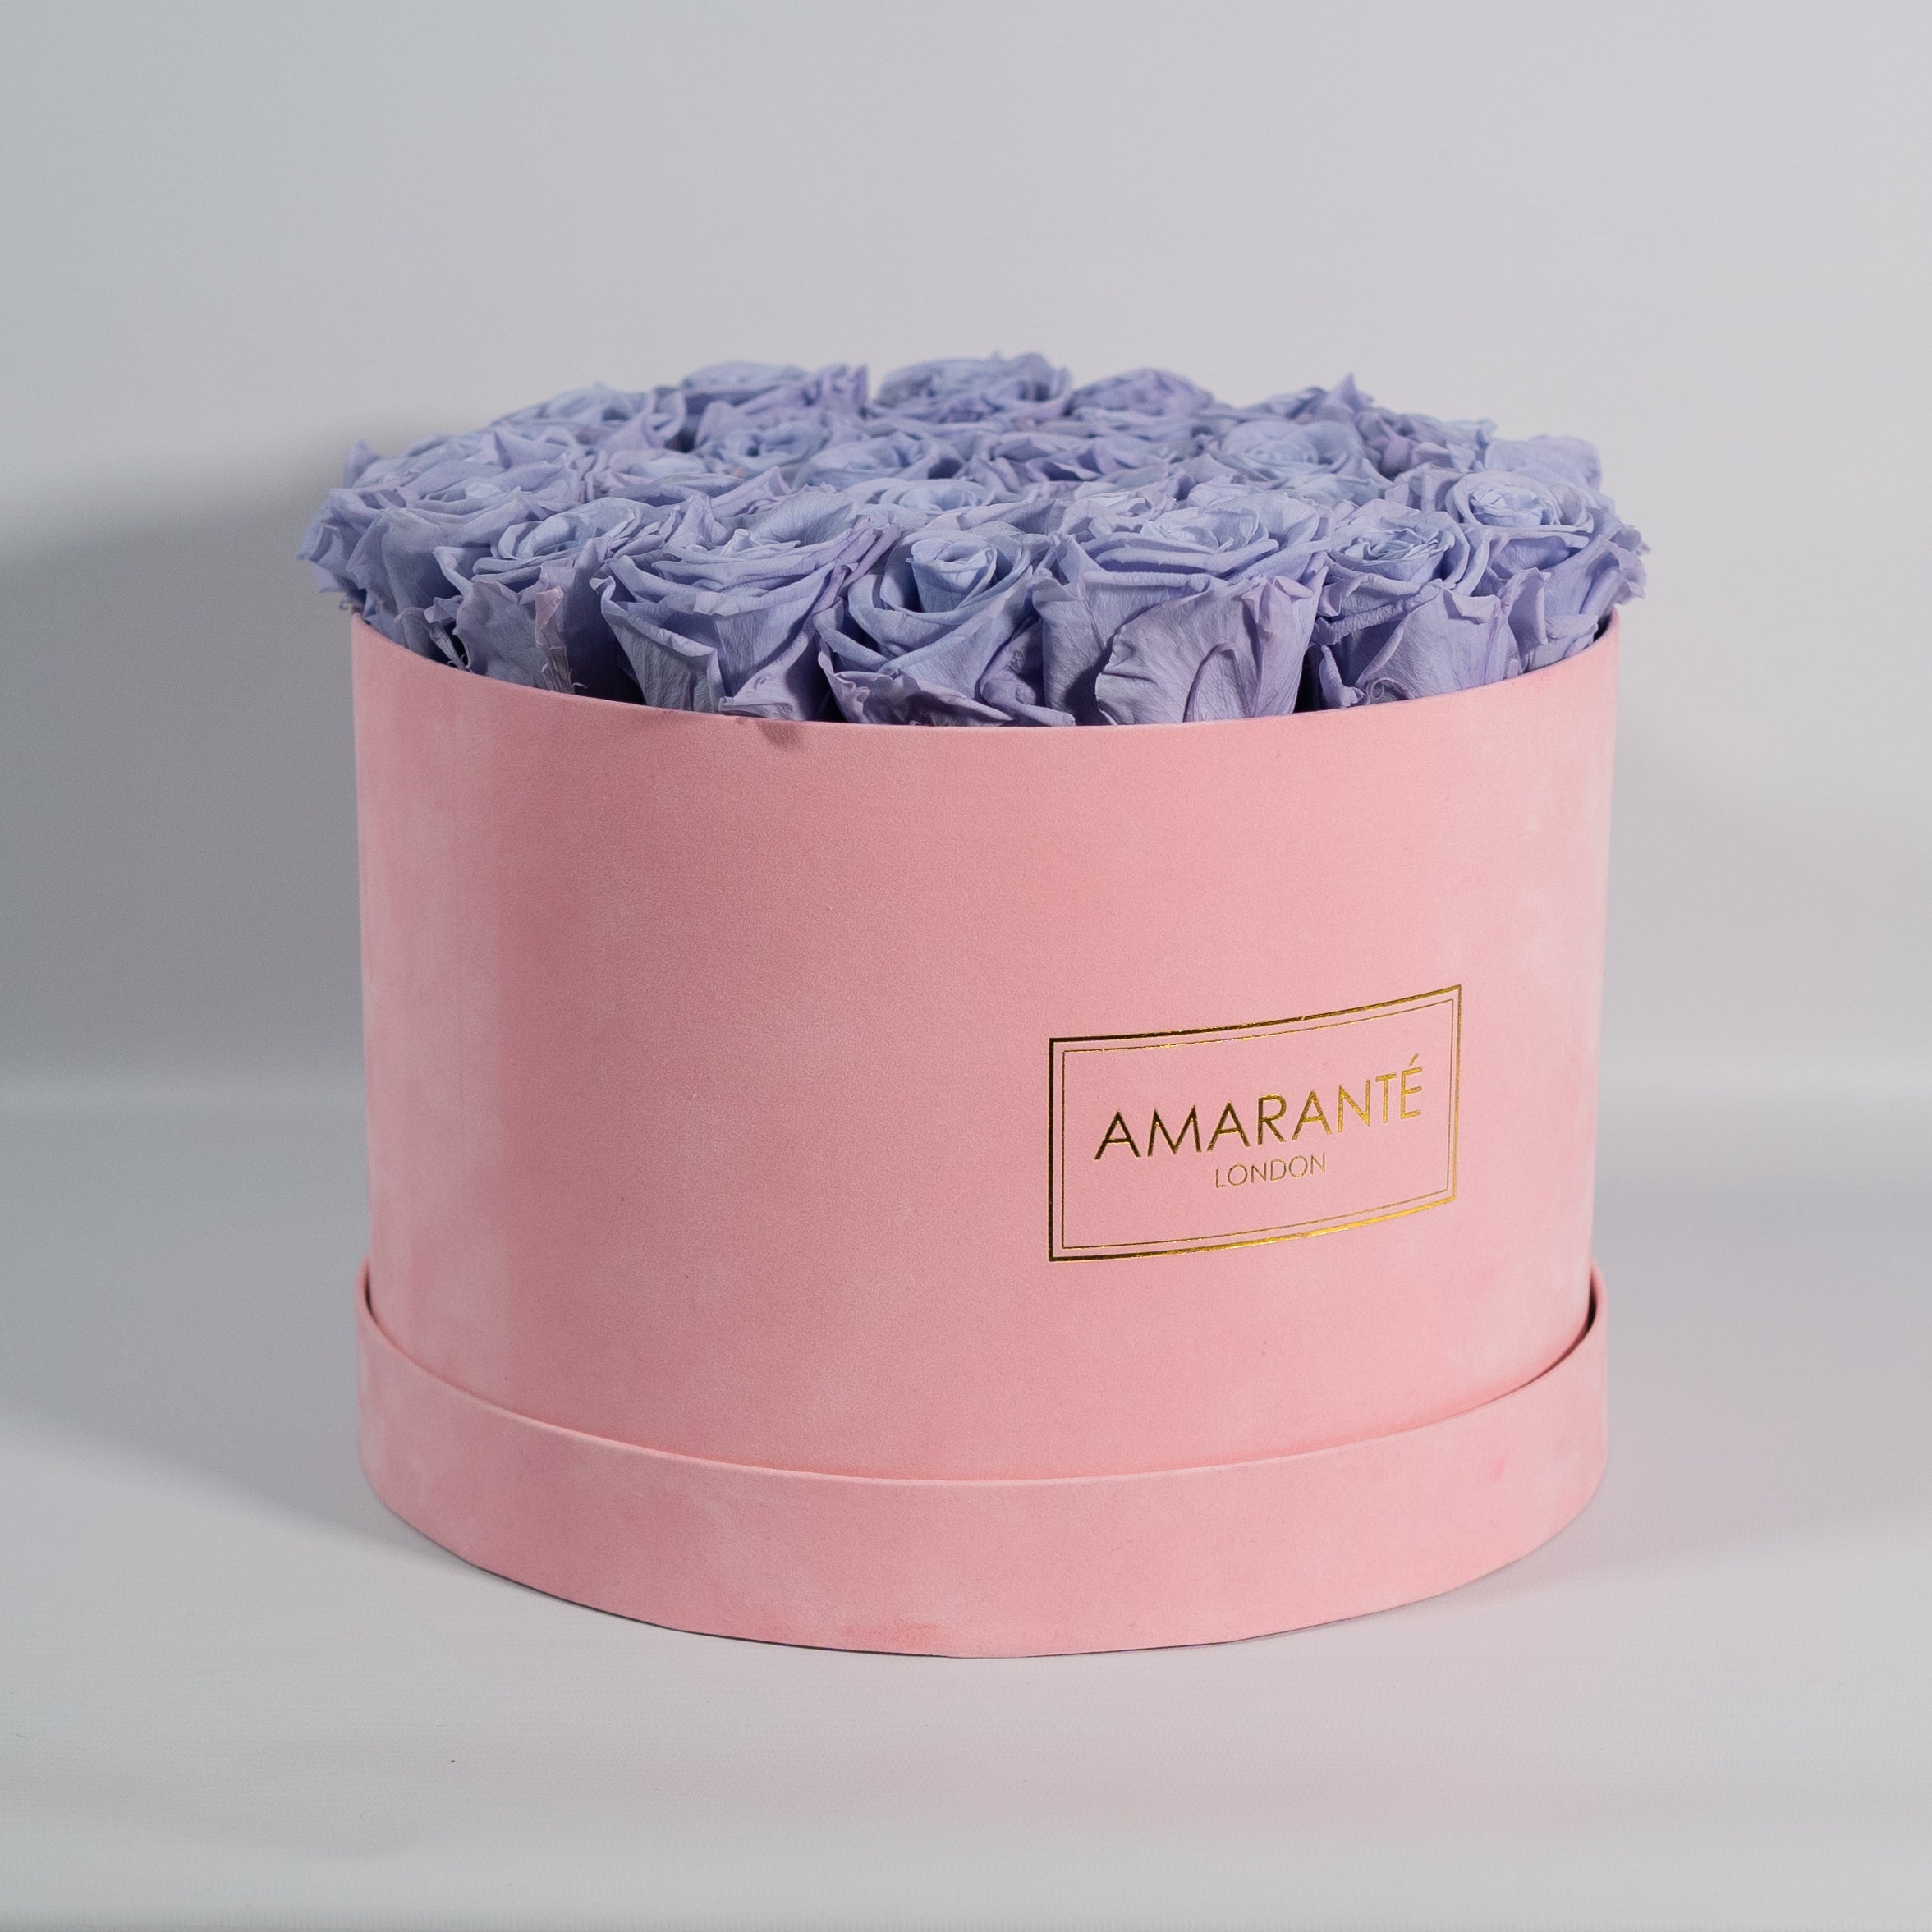 Tranquilising  Lavender Roses imbedded in a sophisticated pink box 